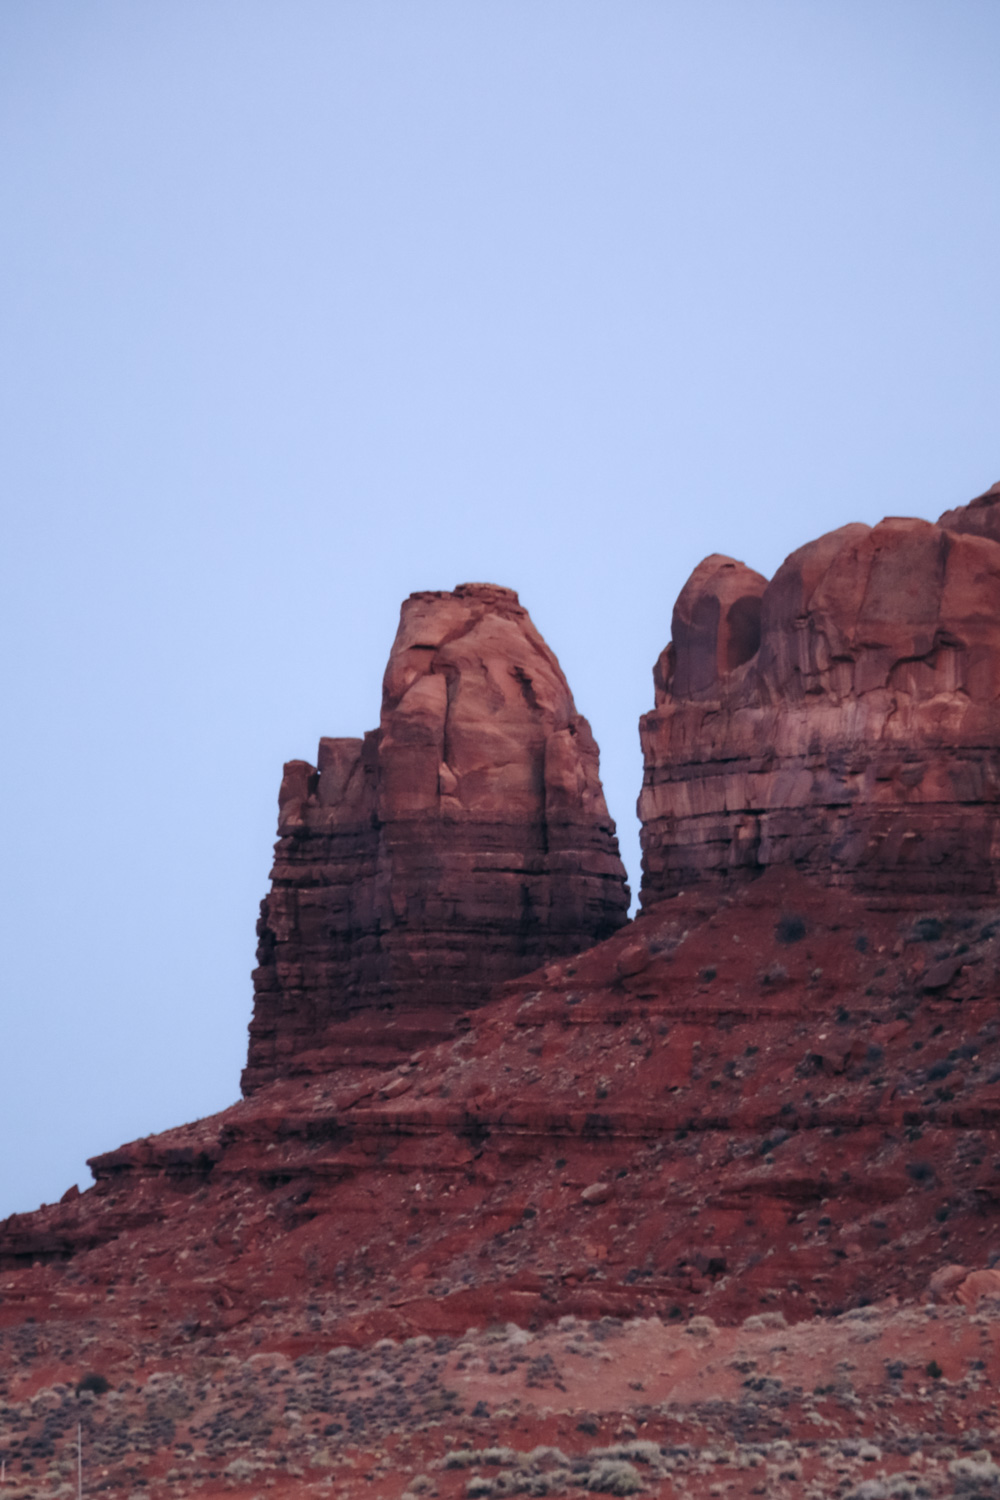 One day in Oljato - Monument Valley, Utah - Roads and Destinations